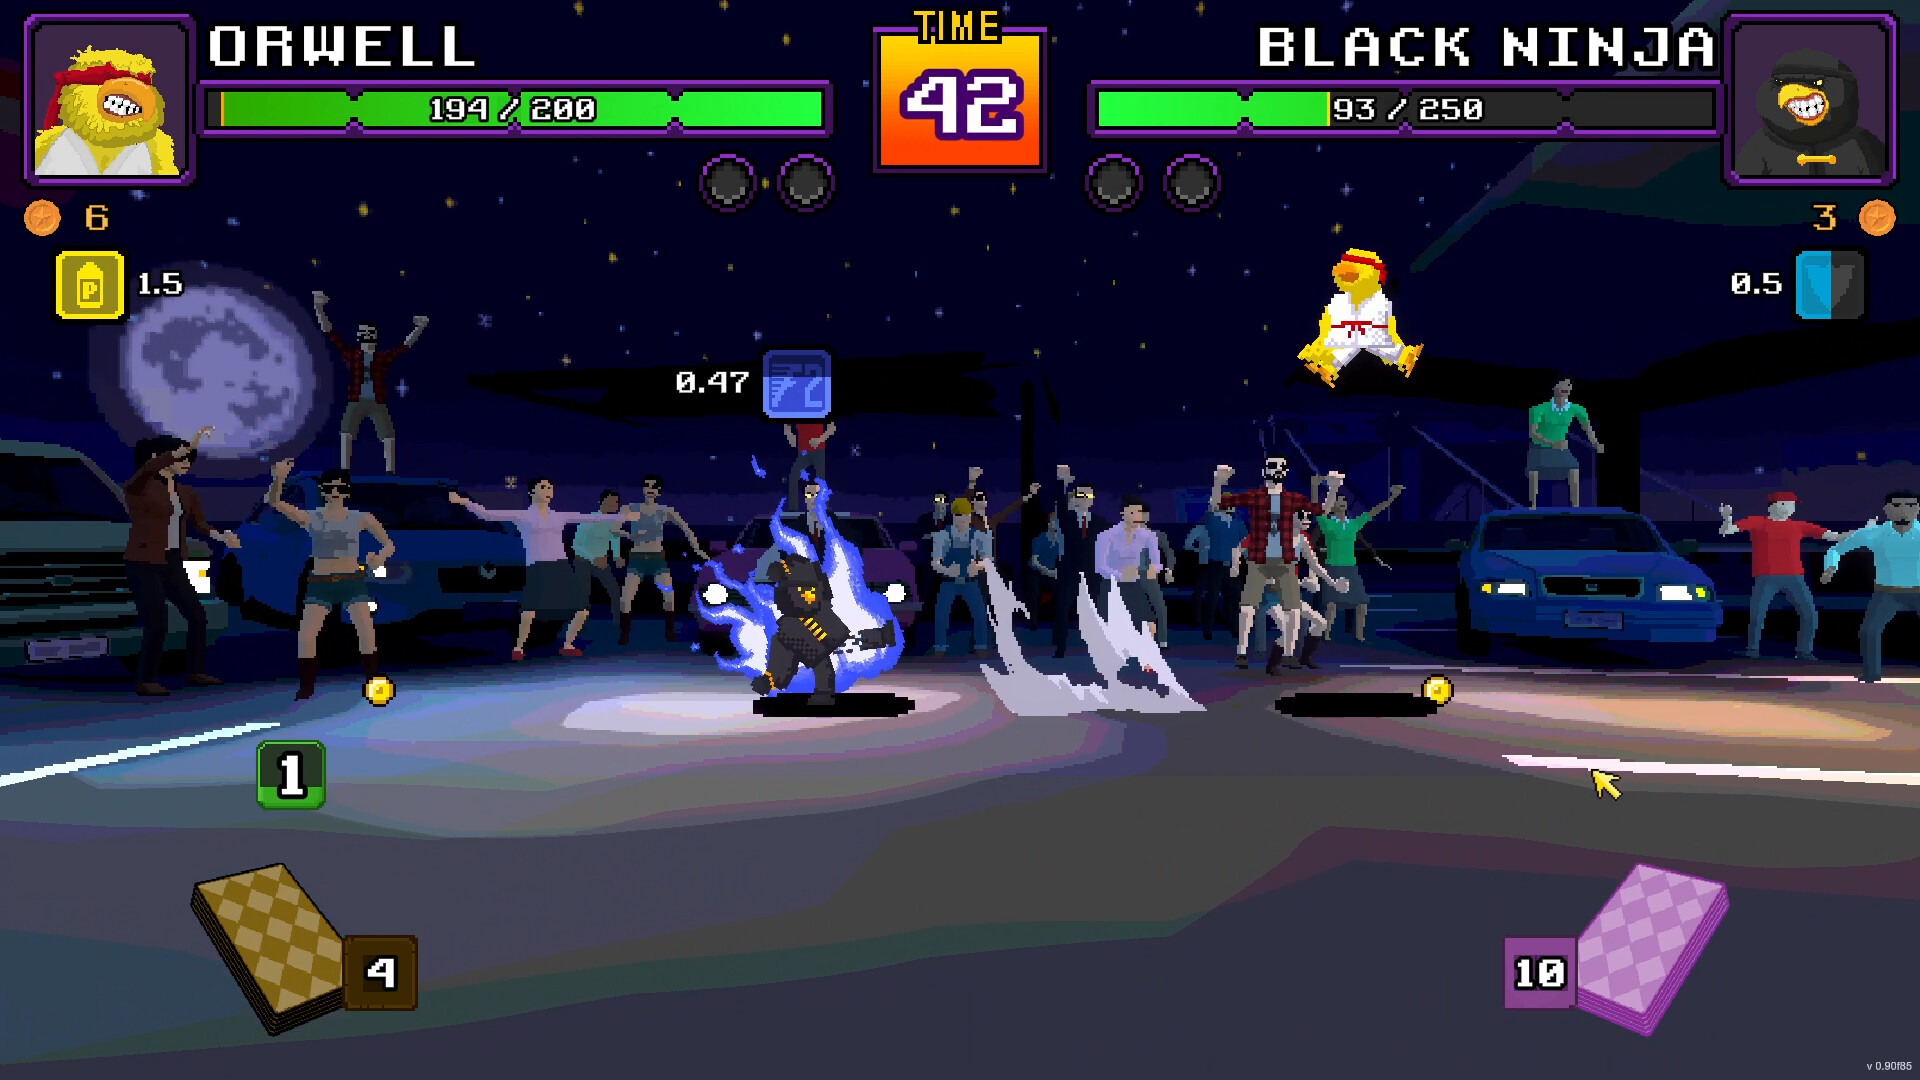 A cartoonish gameplay with characters fighting out in 1x1 battles. Screenshot is from game Mutant Karate Canary.